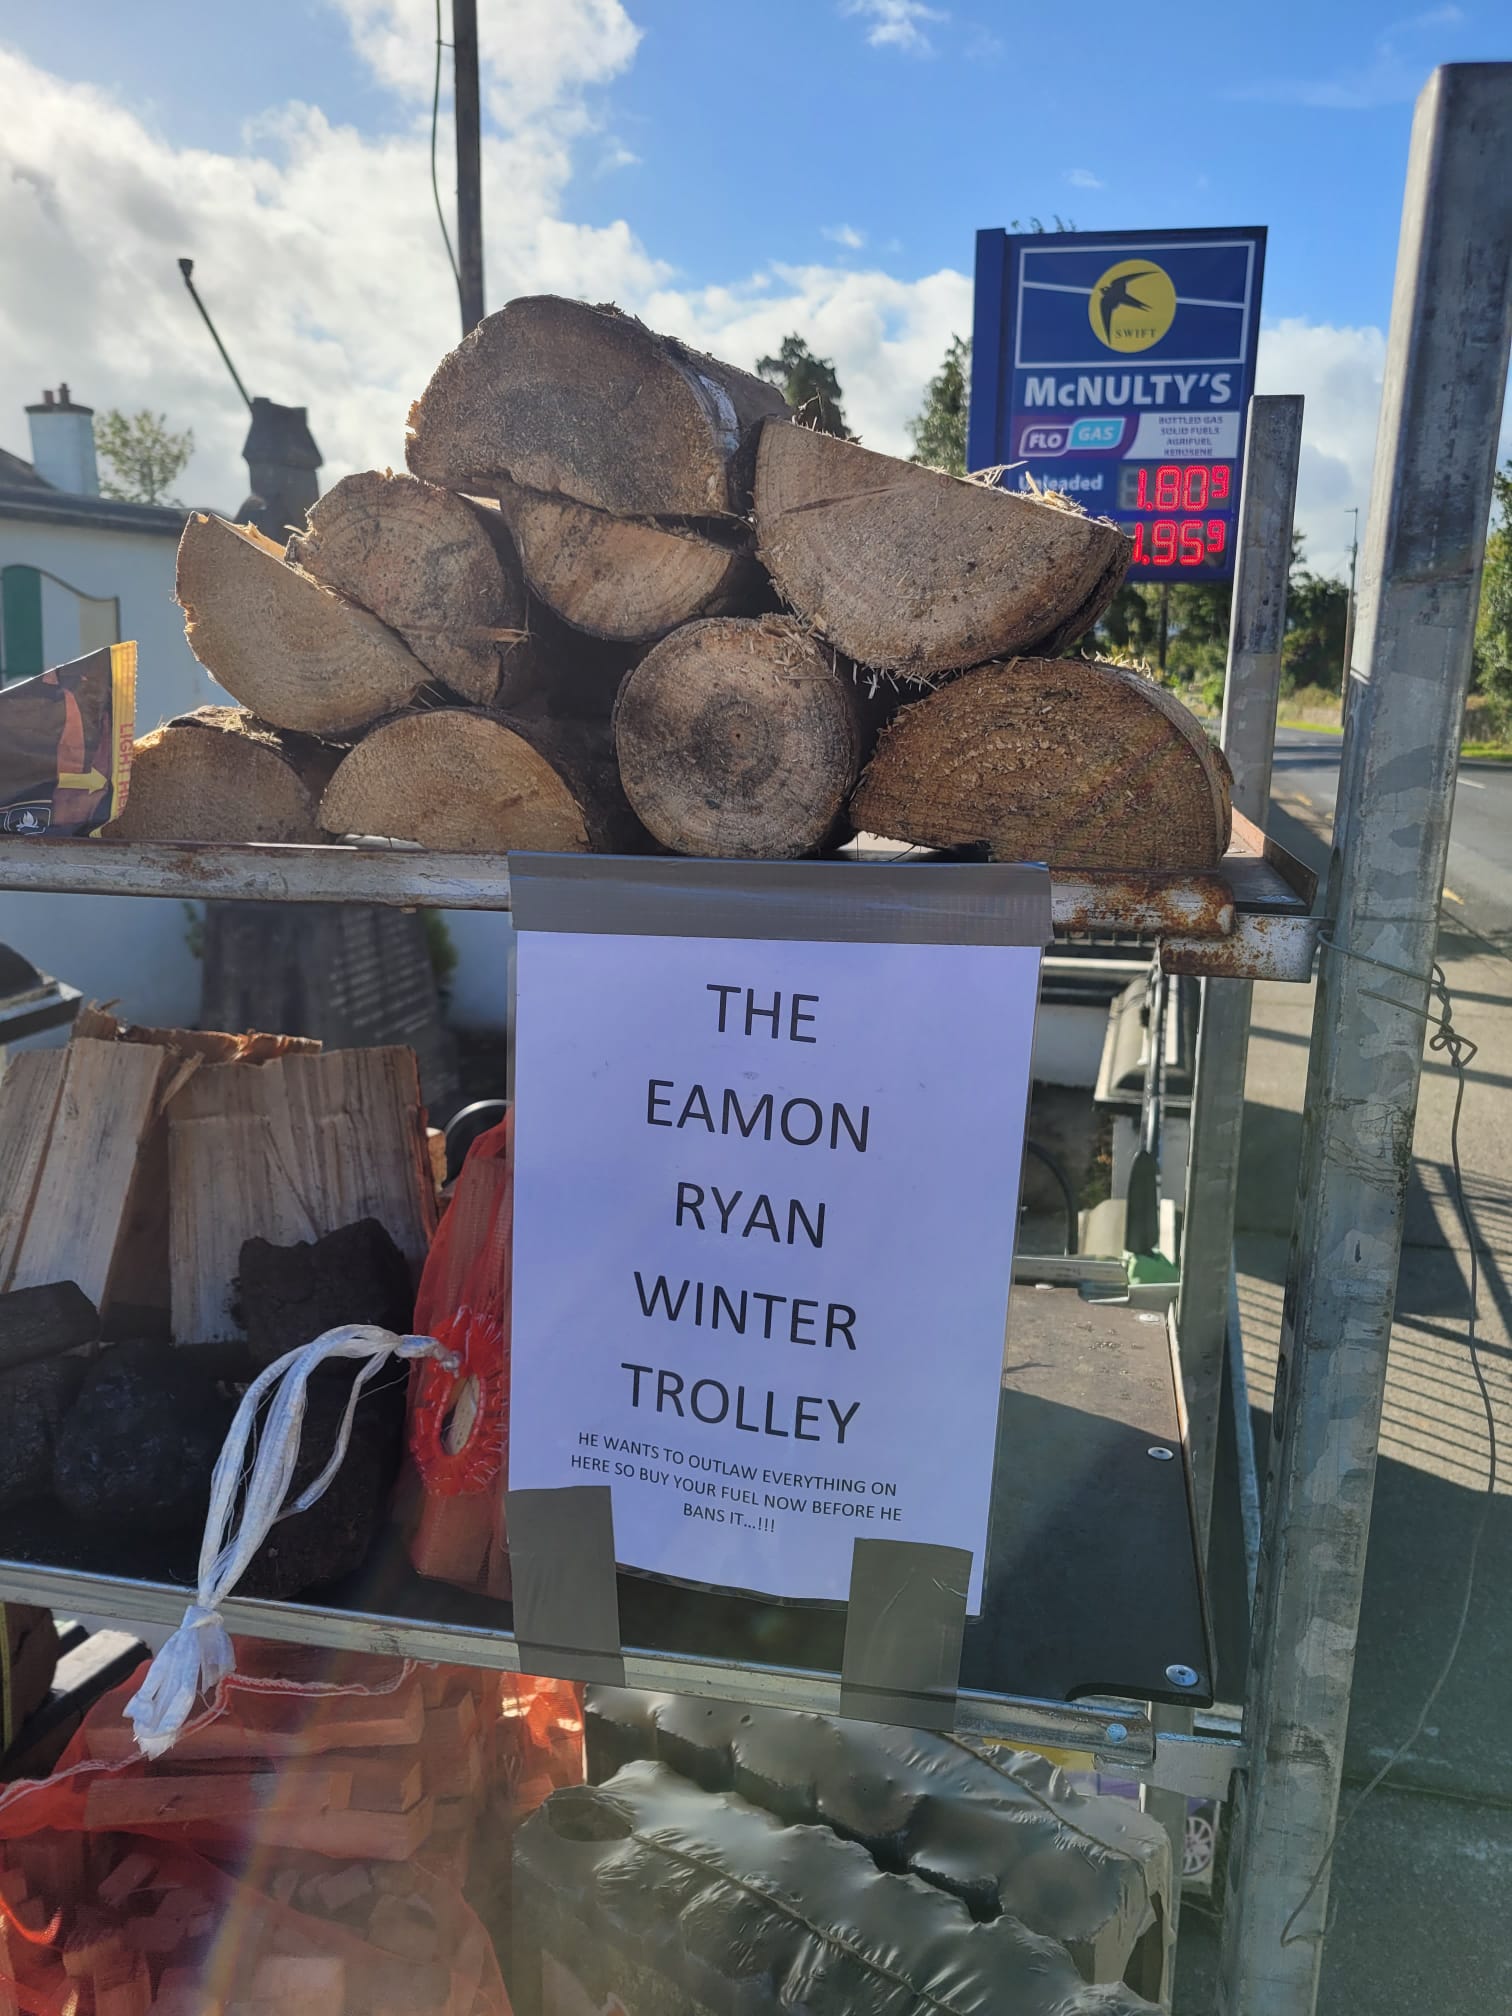 The ‘Eamon Ryan Winter Trolley’ at McNulty Fuels in Hospital, County Limerick. Image: McNulty Fuels